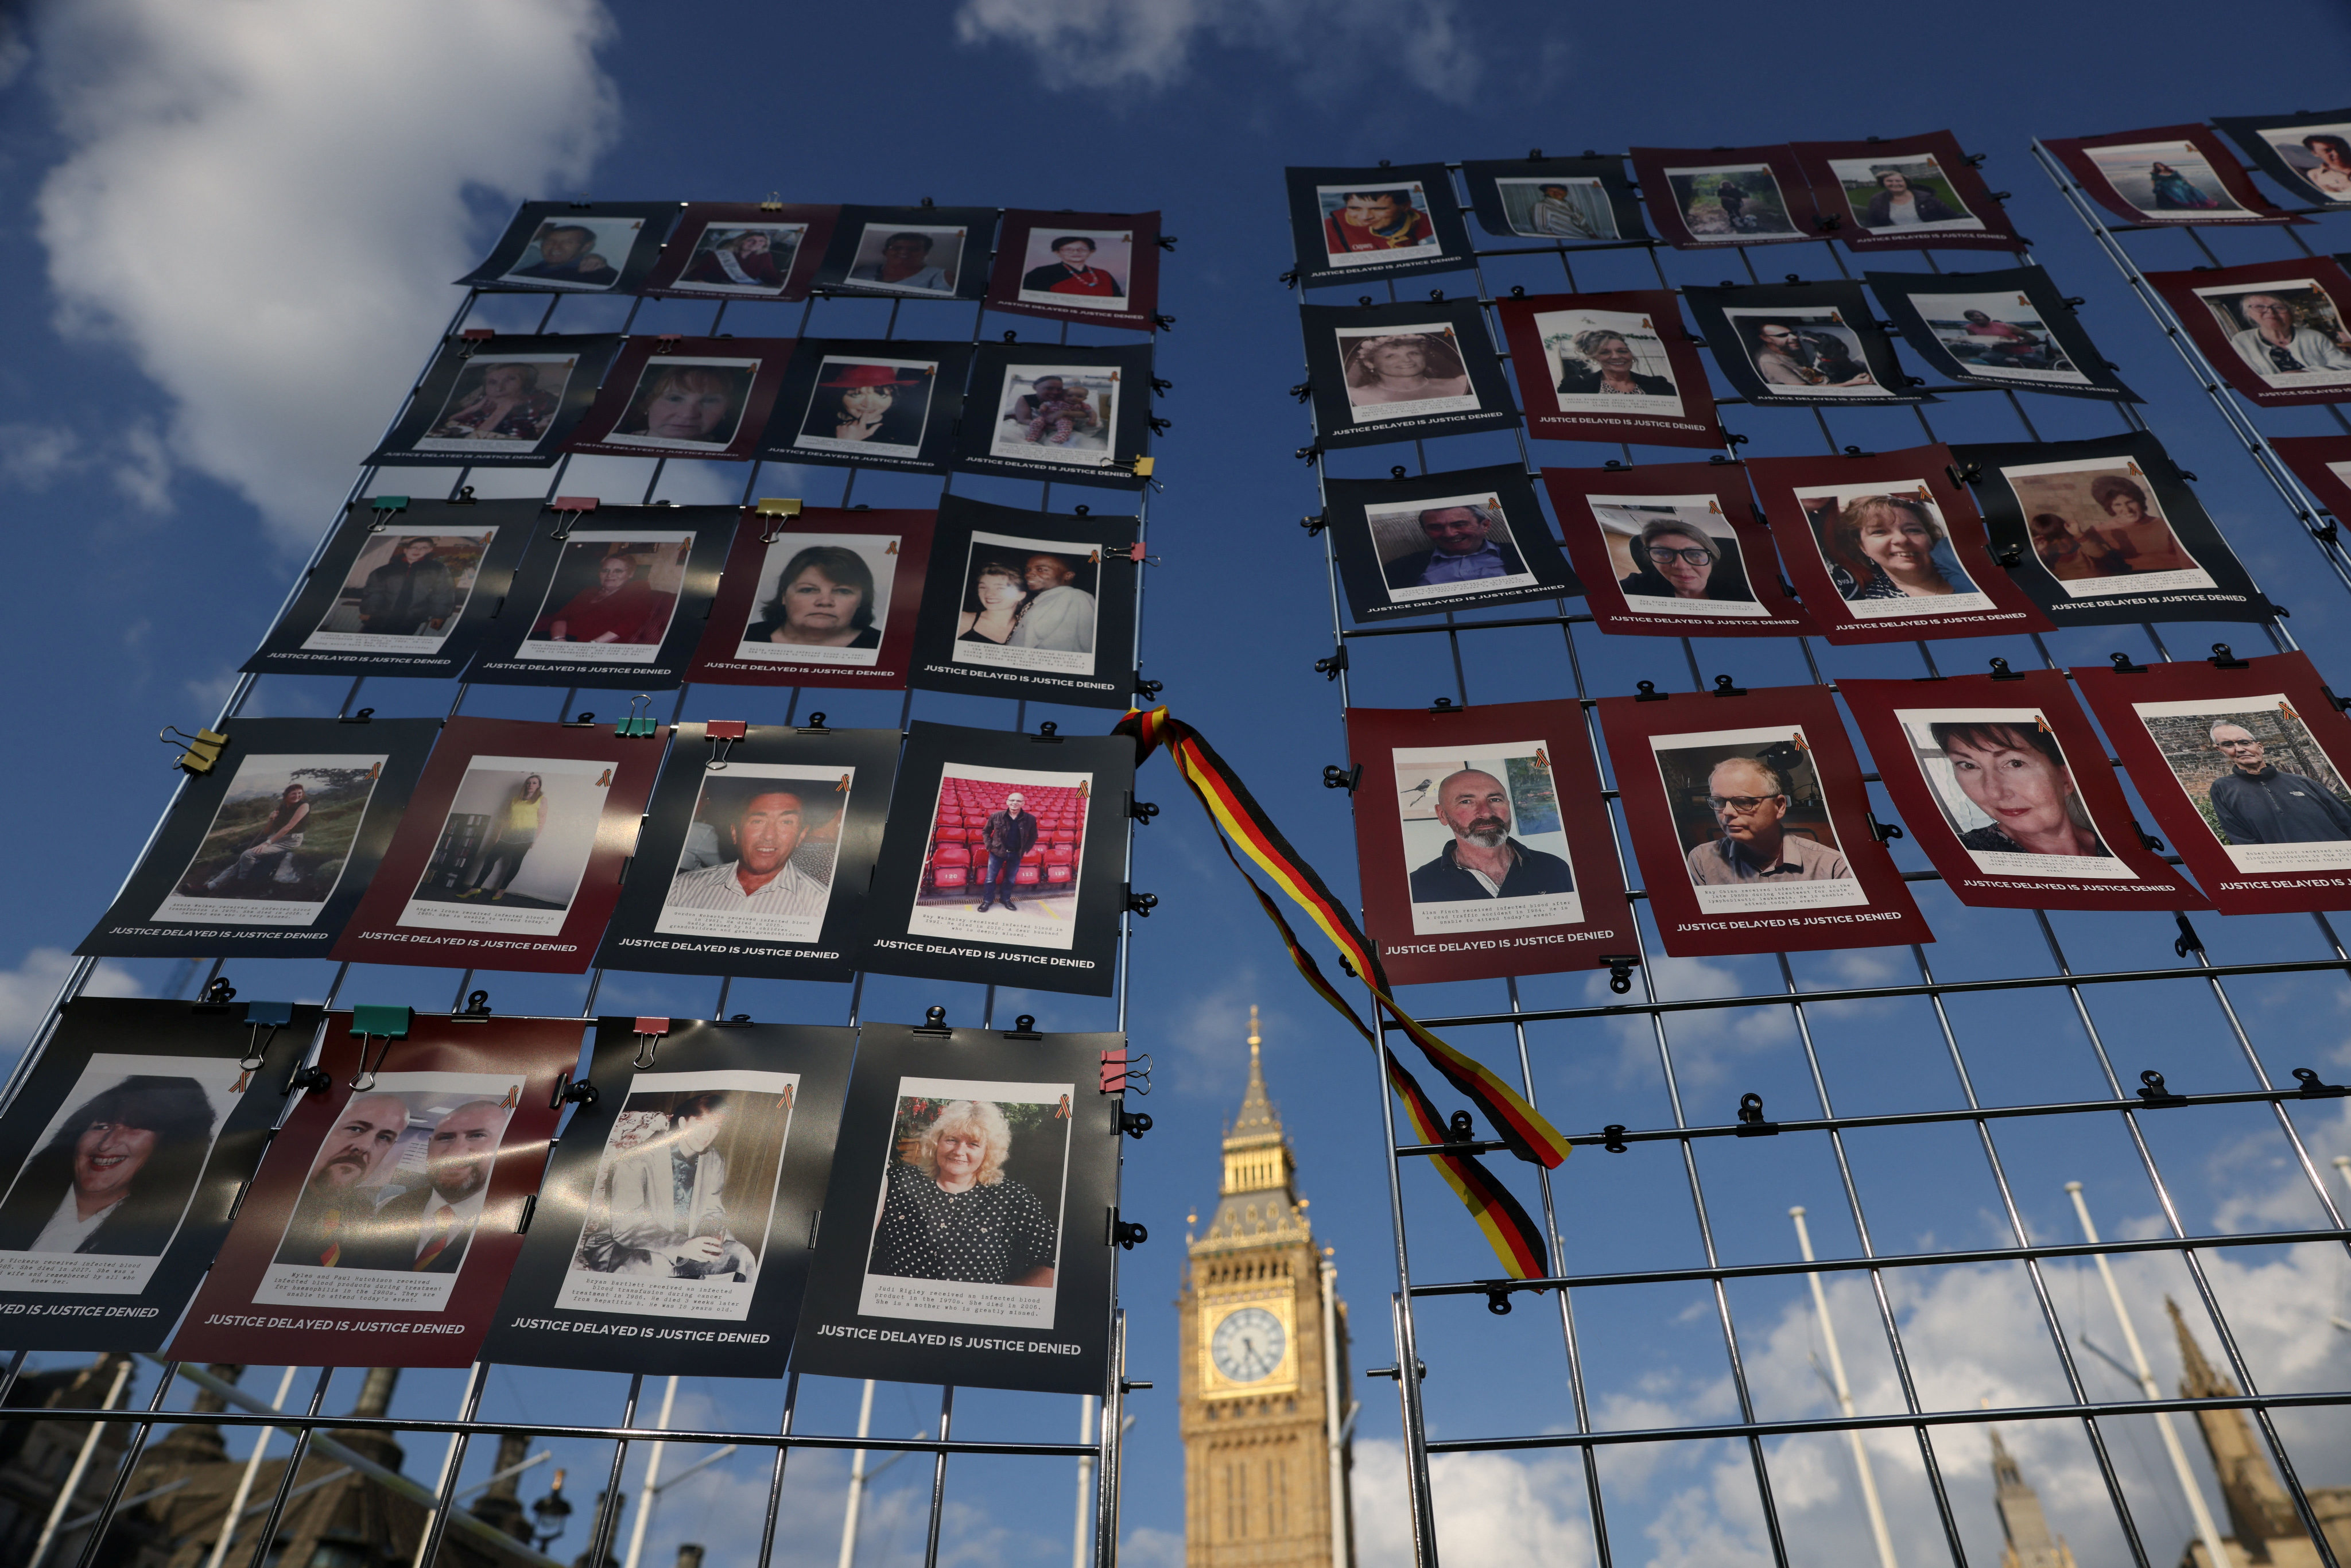 Images of victims of the contaminated blood scandal are displayed during a vigil to remember those that lost their lives, ahead of the release of final report of the Infected Blood Inquiry on Monday, in London. Photo: Reuters